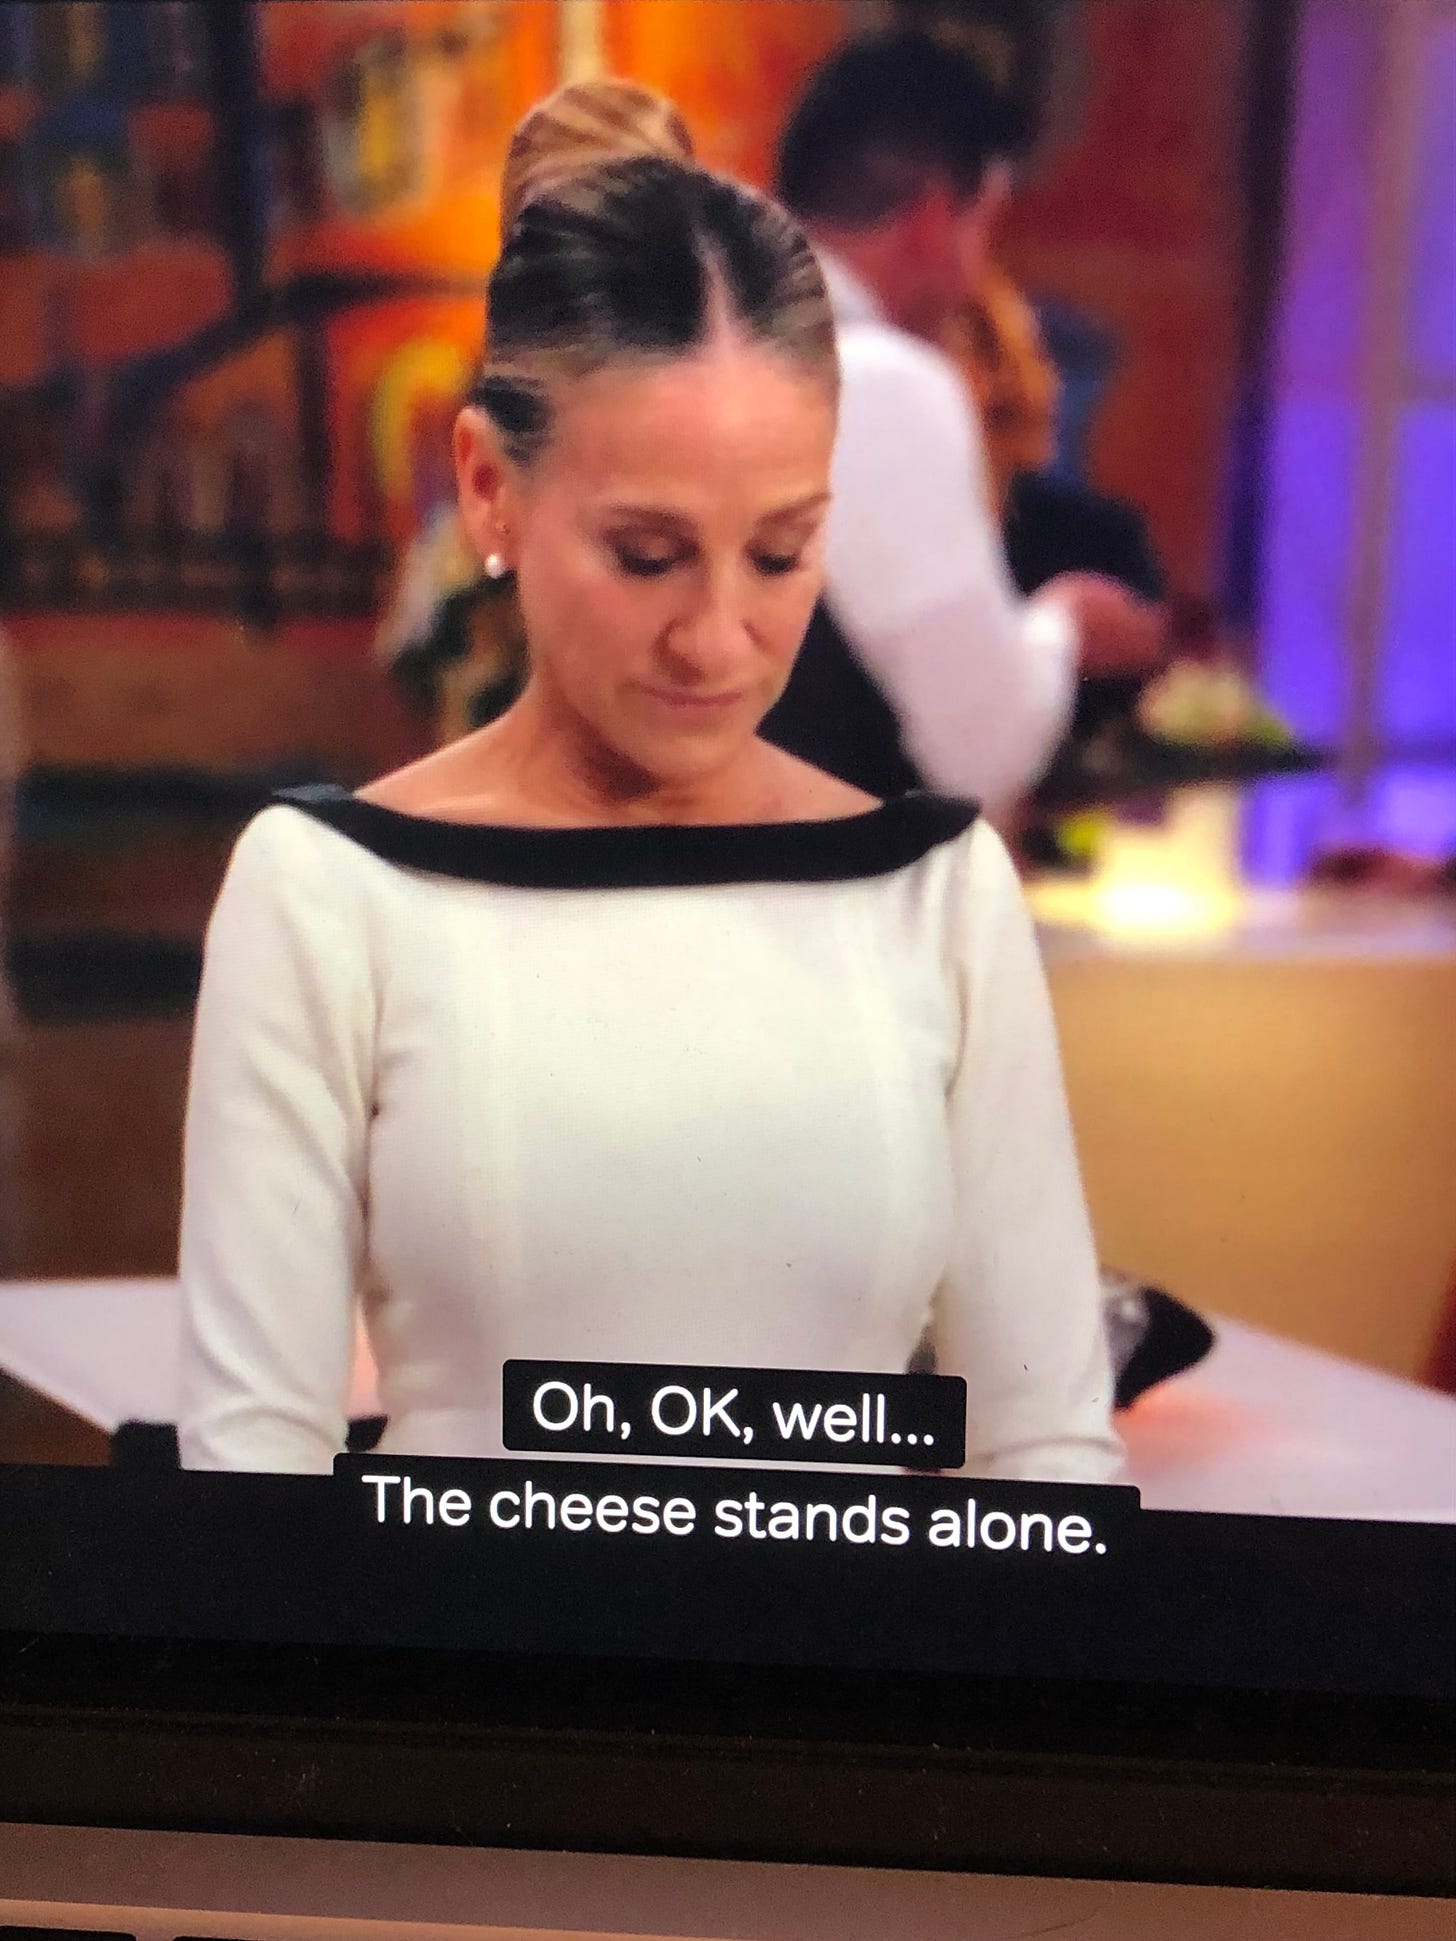 A still from 'And Just Like That' of a white middle aged woman with her eyes cast down. The Captions reads 'Oh, OK, well...The cheese stands alone.'